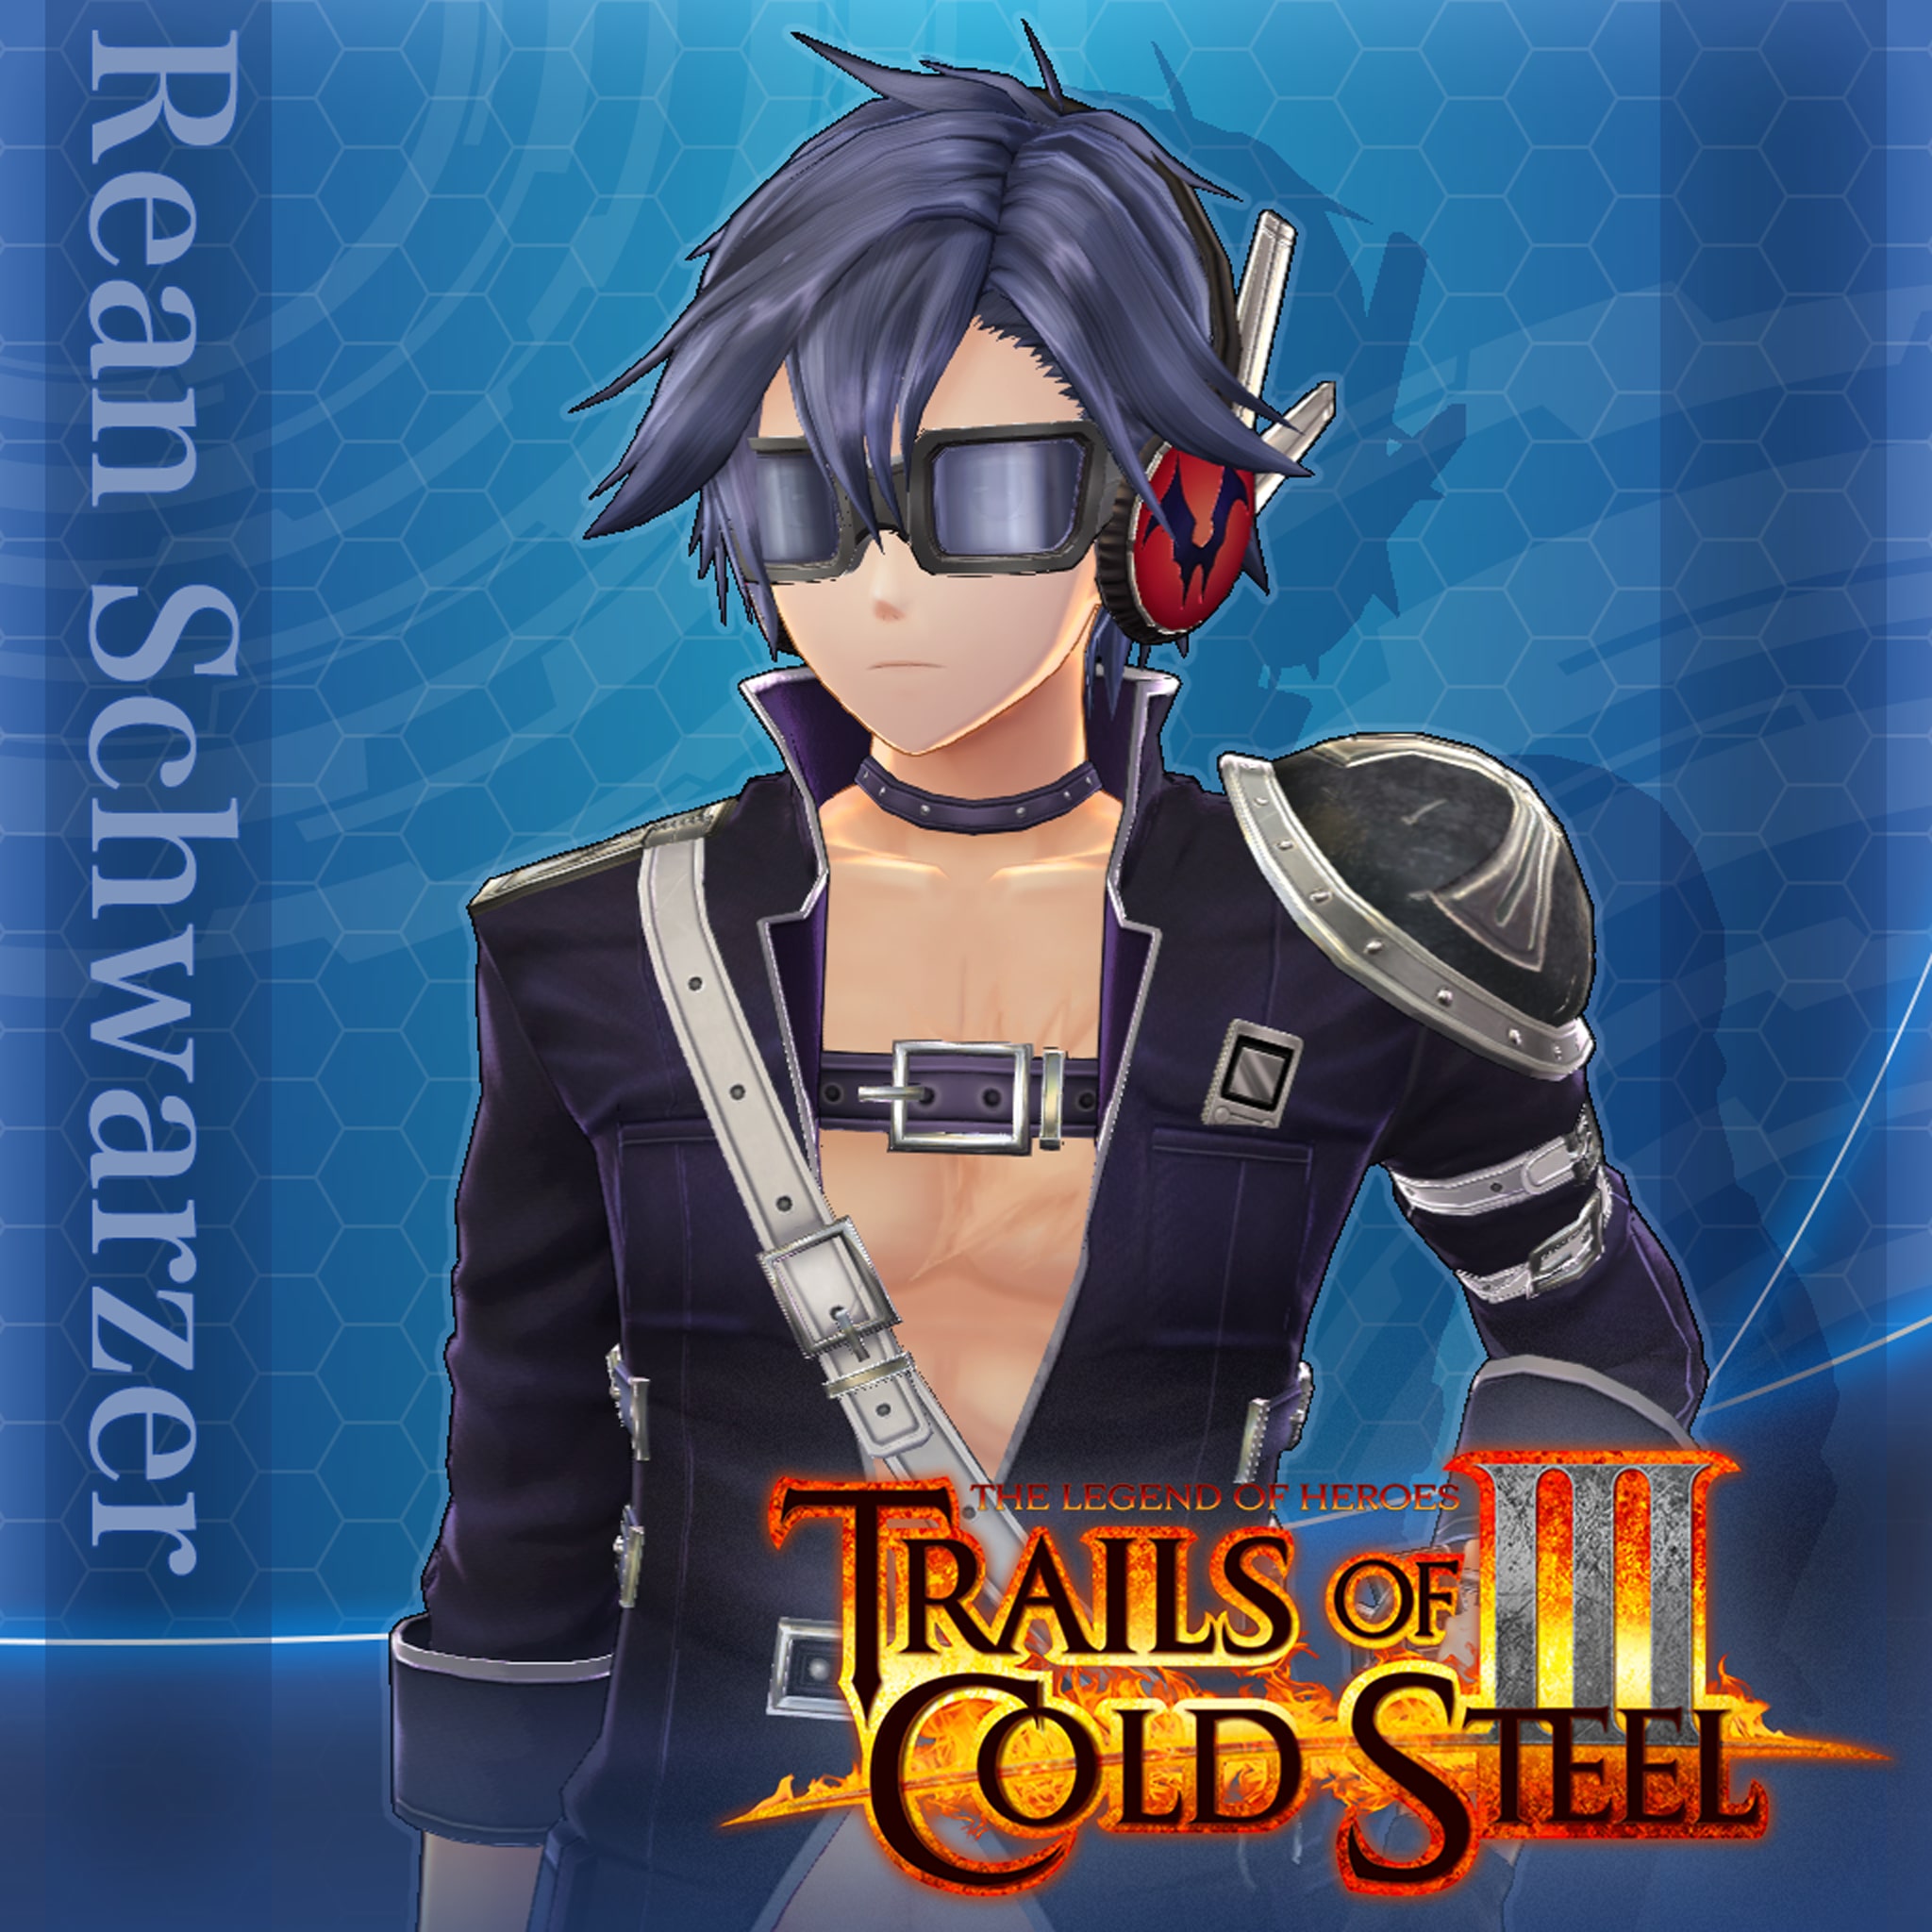 Trails of Cold Steel III: Rean's Unspeakable Costume